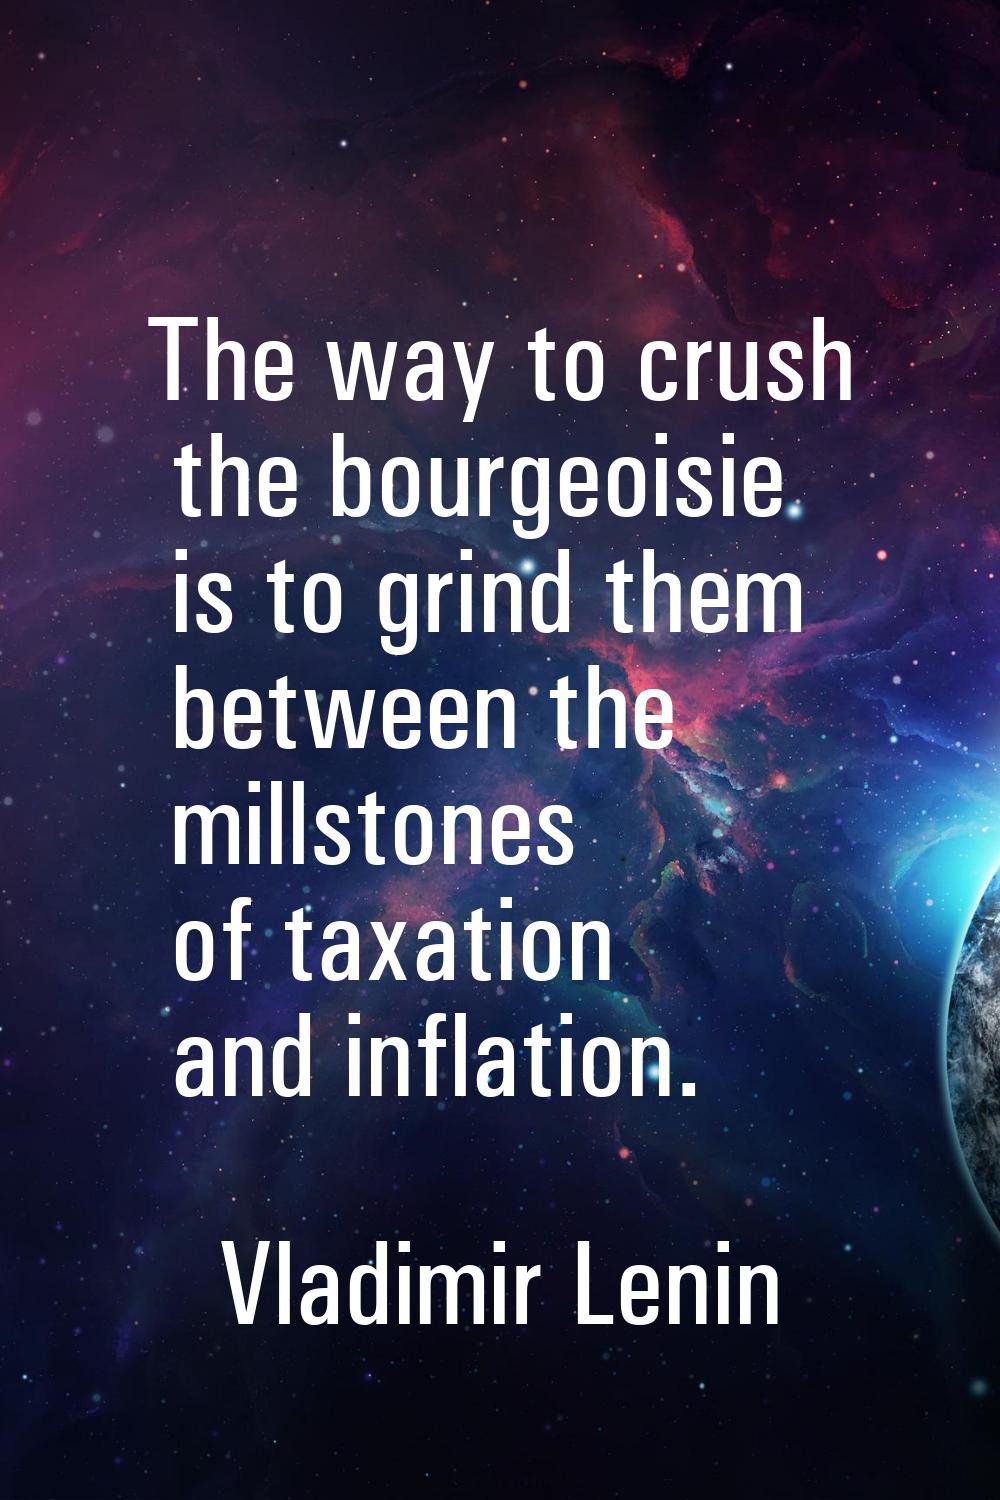 The way to crush the bourgeoisie is to grind them between the millstones of taxation and inflation.